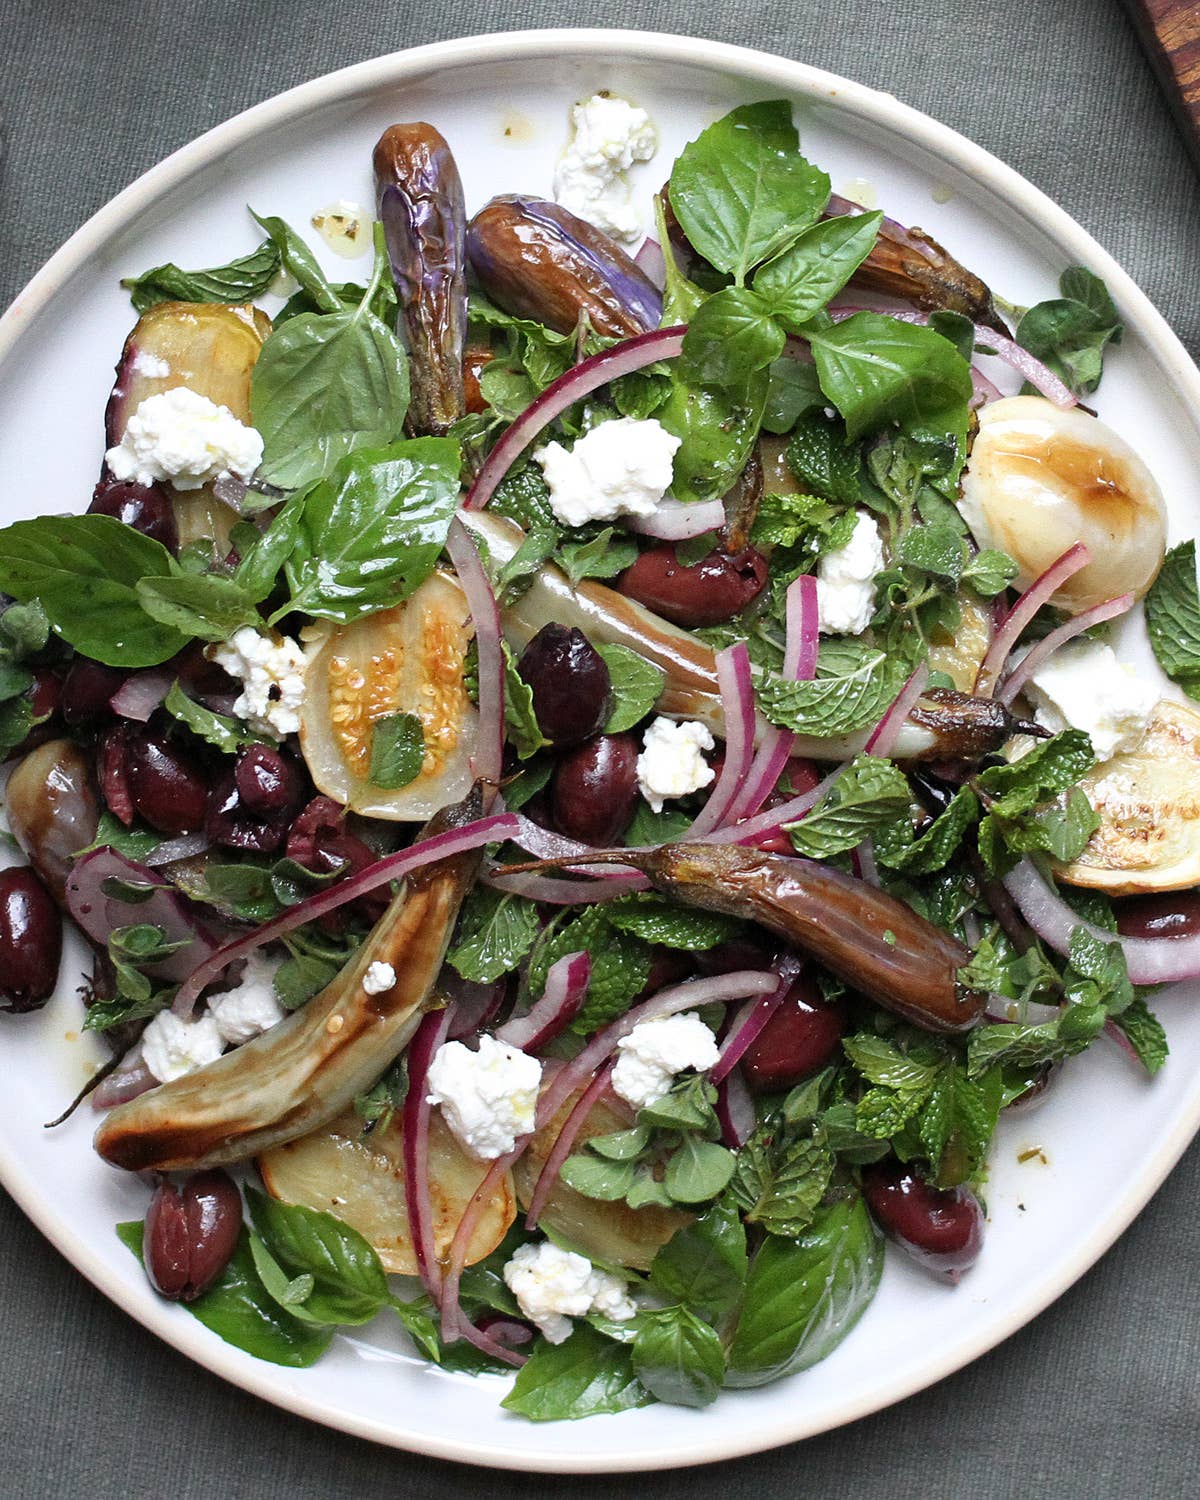 Turn Your Eggplants Into Salad for a Quick but Filling Meal